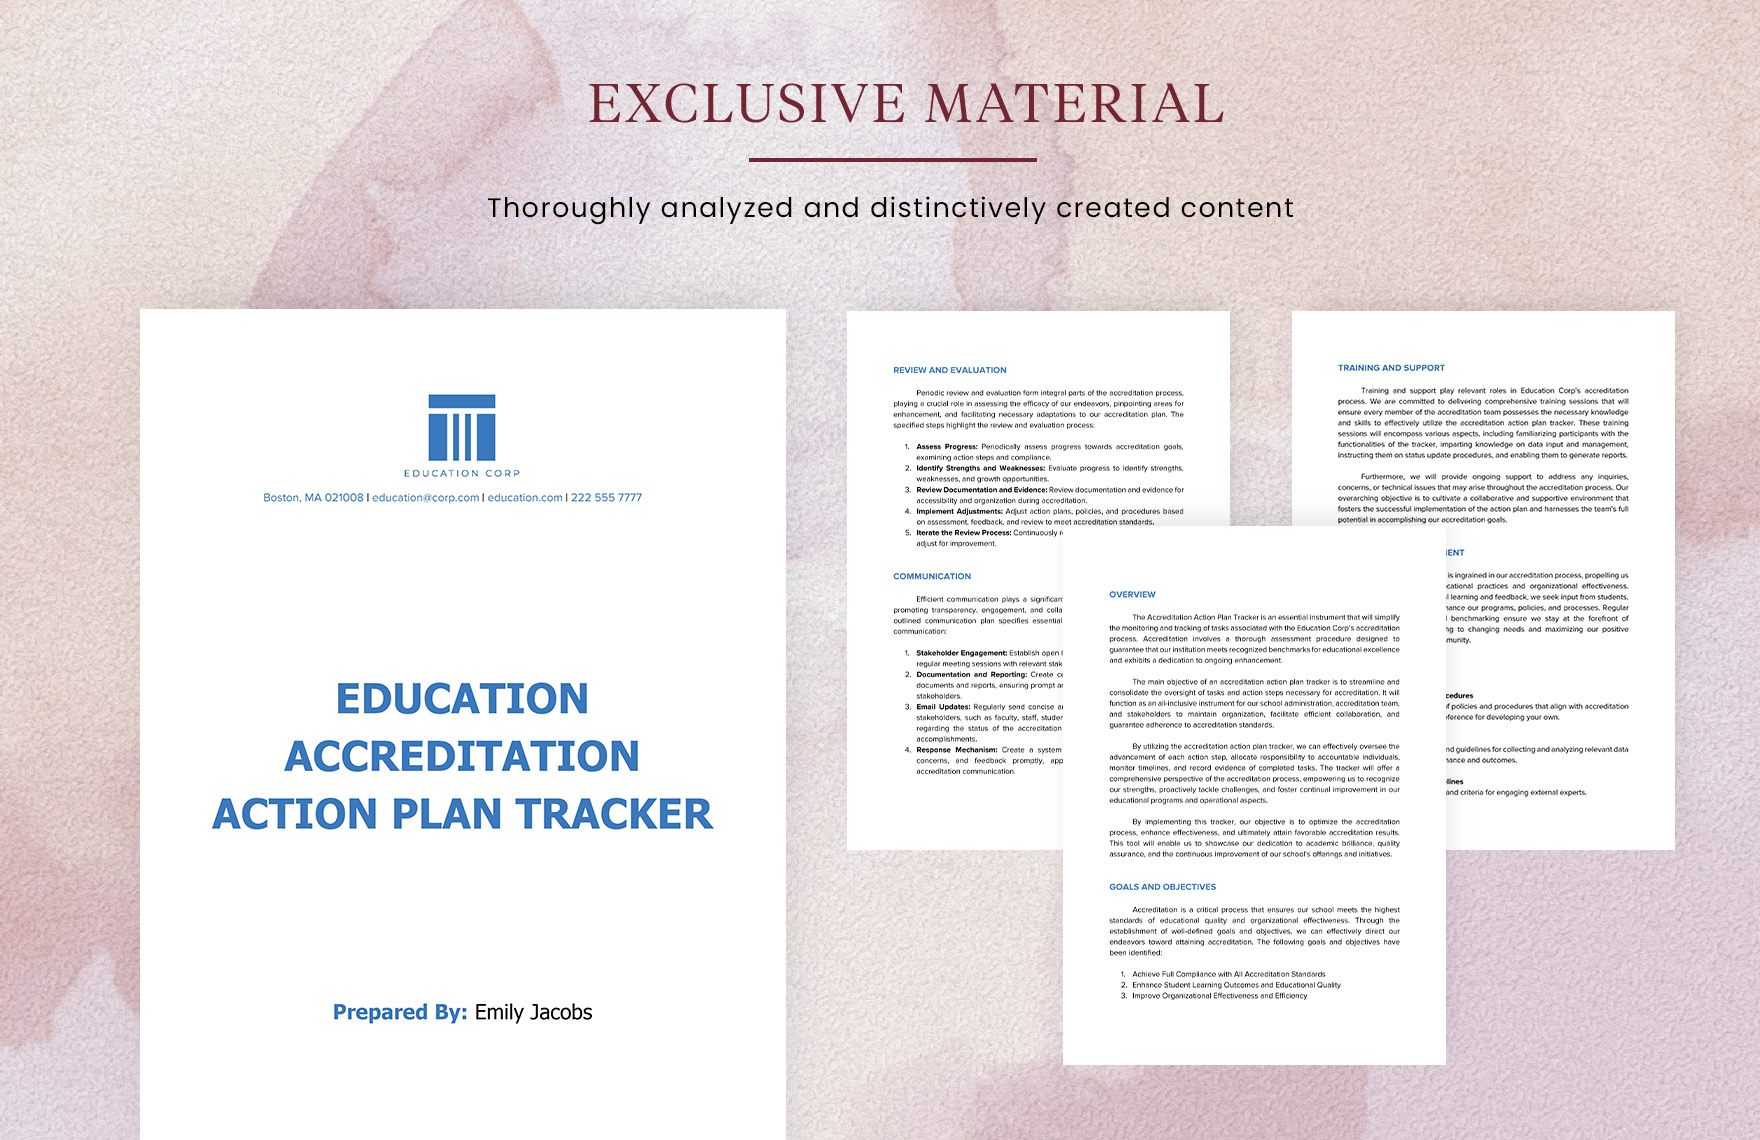 Education Accreditation Action Plan Tracker Template